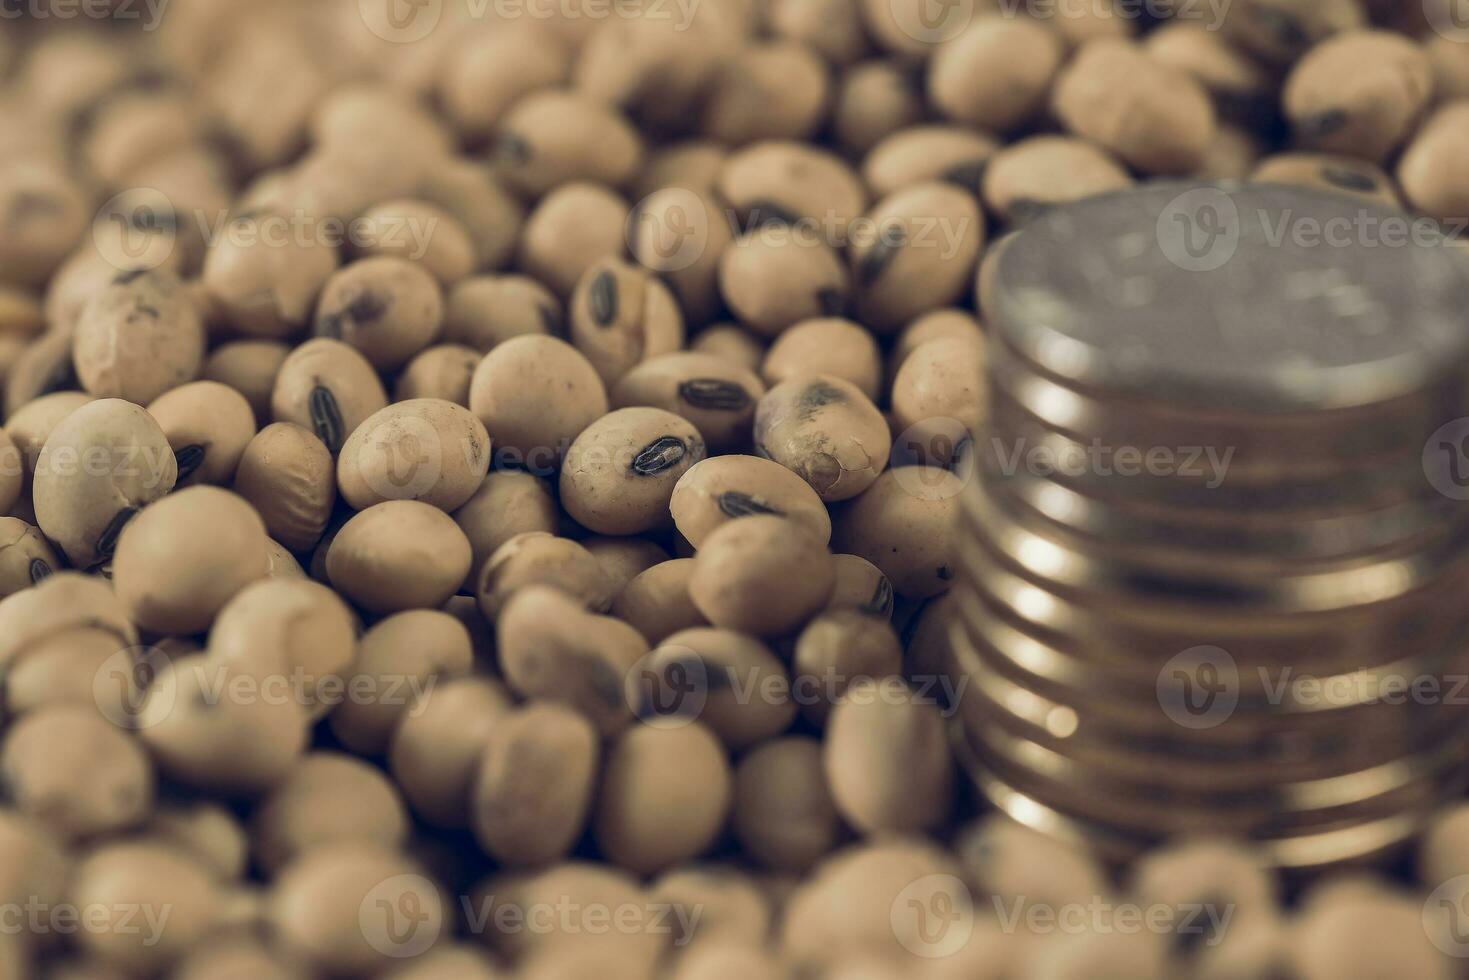 Dollars banknotes and coins and soy beans,oleaginous commoditi value concept. photo